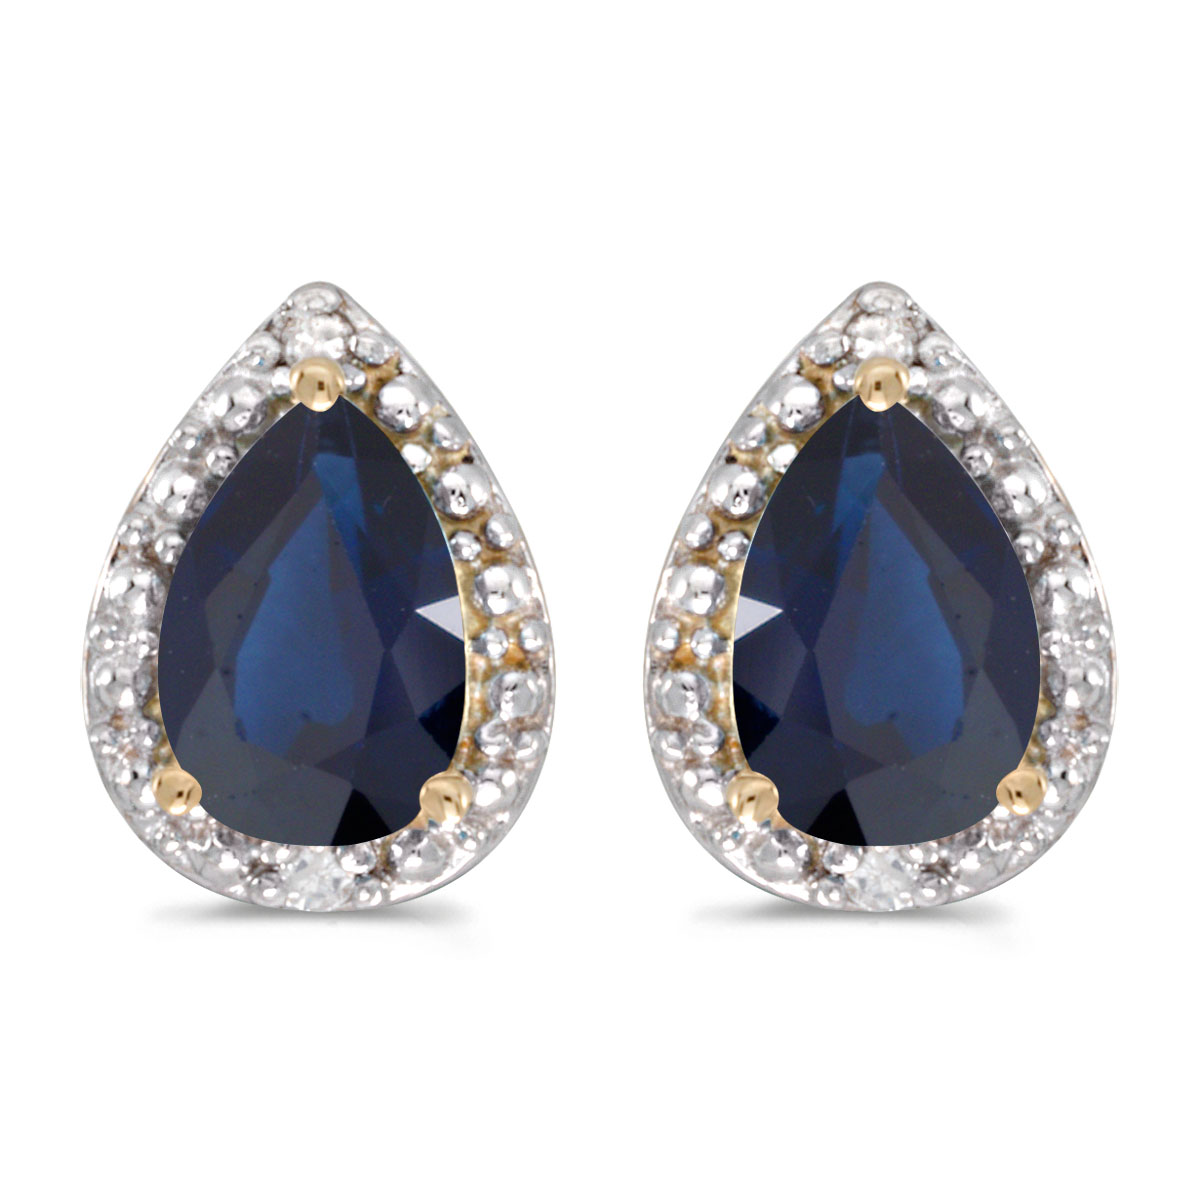 JCX2024: These 14k yellow gold pear sapphire and diamond earrings feature 6x4 mm genuine natural sapphires with a 1.26 ct total weight and sparkling diamond accents.